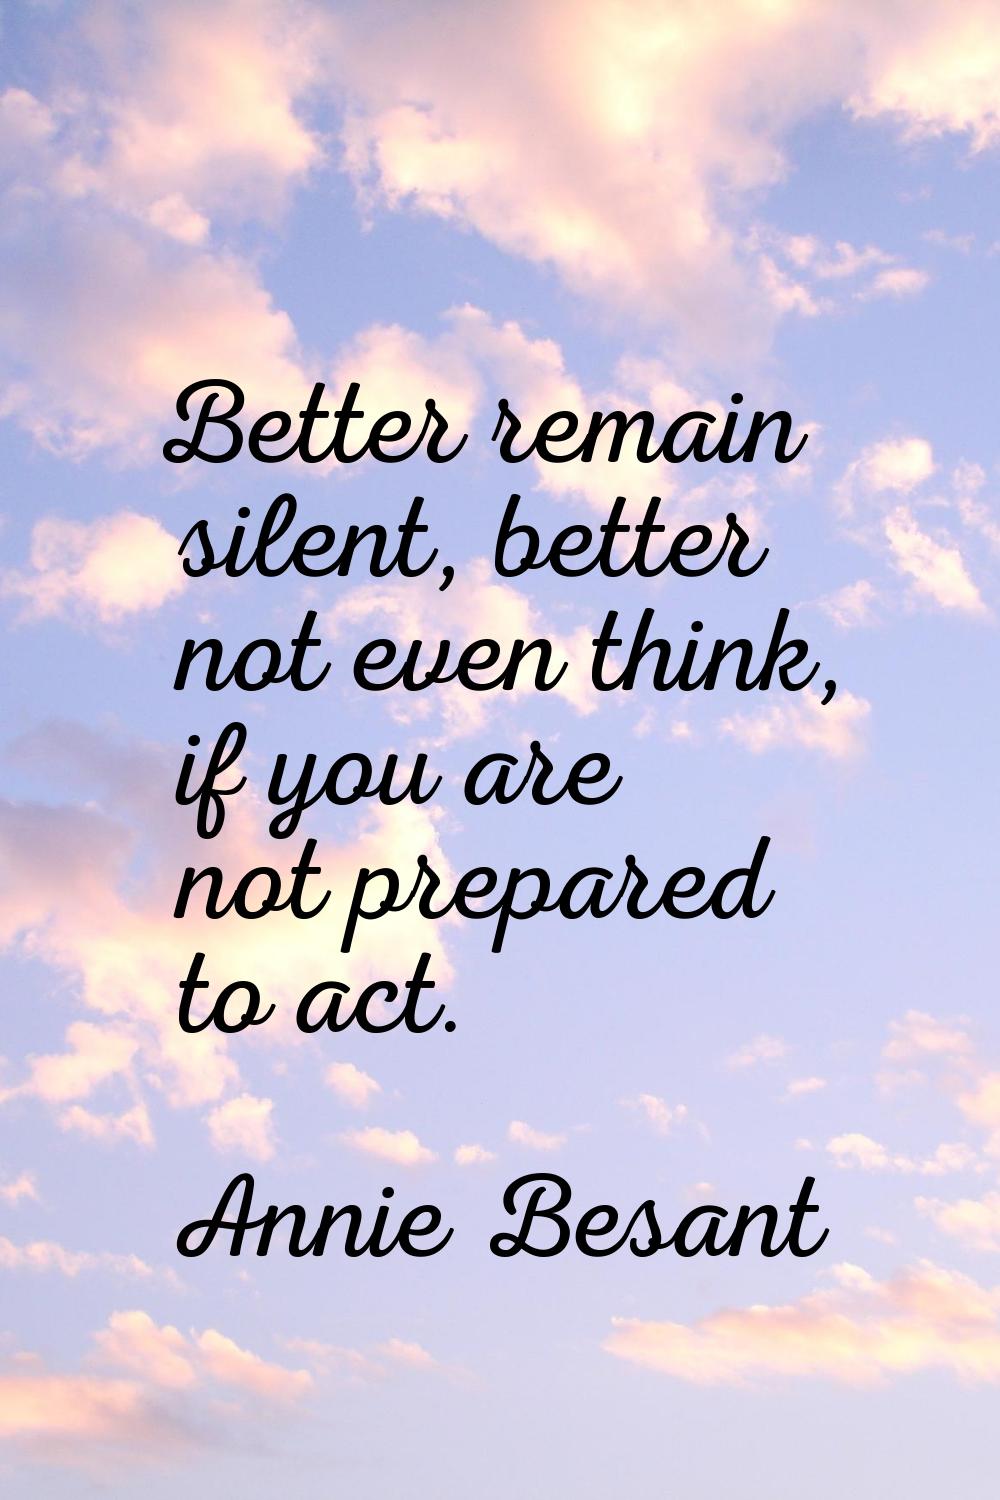 Better remain silent, better not even think, if you are not prepared to act.